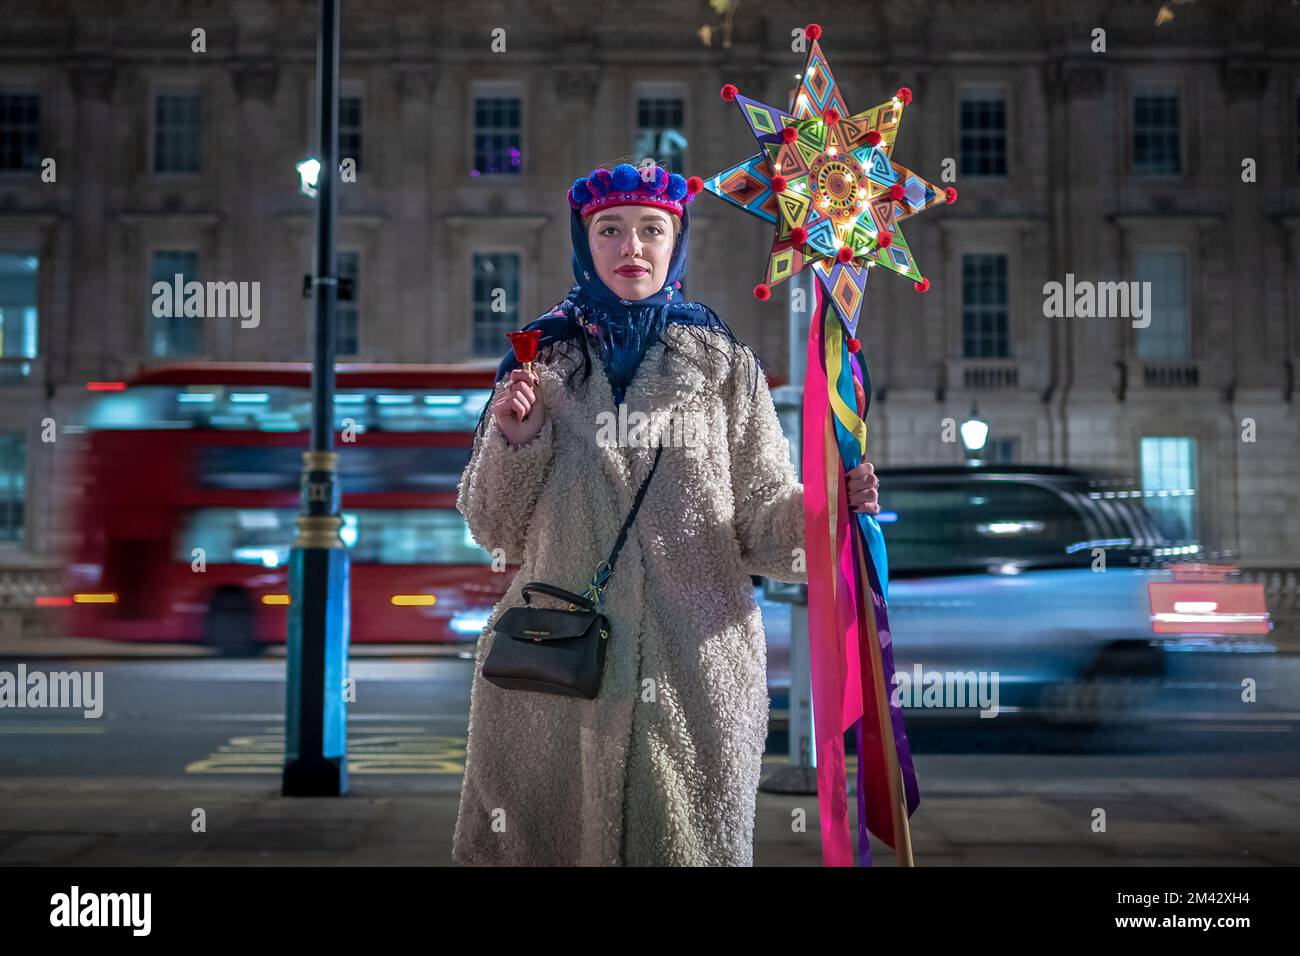 London, UK. 17th December 2022. British-Ukrainian protesters stage a Vertep theatre performance near Downing Street. In Ukrainian culture, Vertep is a travelling theatre and drama presenting festive folk stories, nativity scenes and other mystery plays. Traditionally young children dress as the various characters and act out the plays of the Vertep. Credit: Guy Corbishley/Alamy Live News Stock Photo